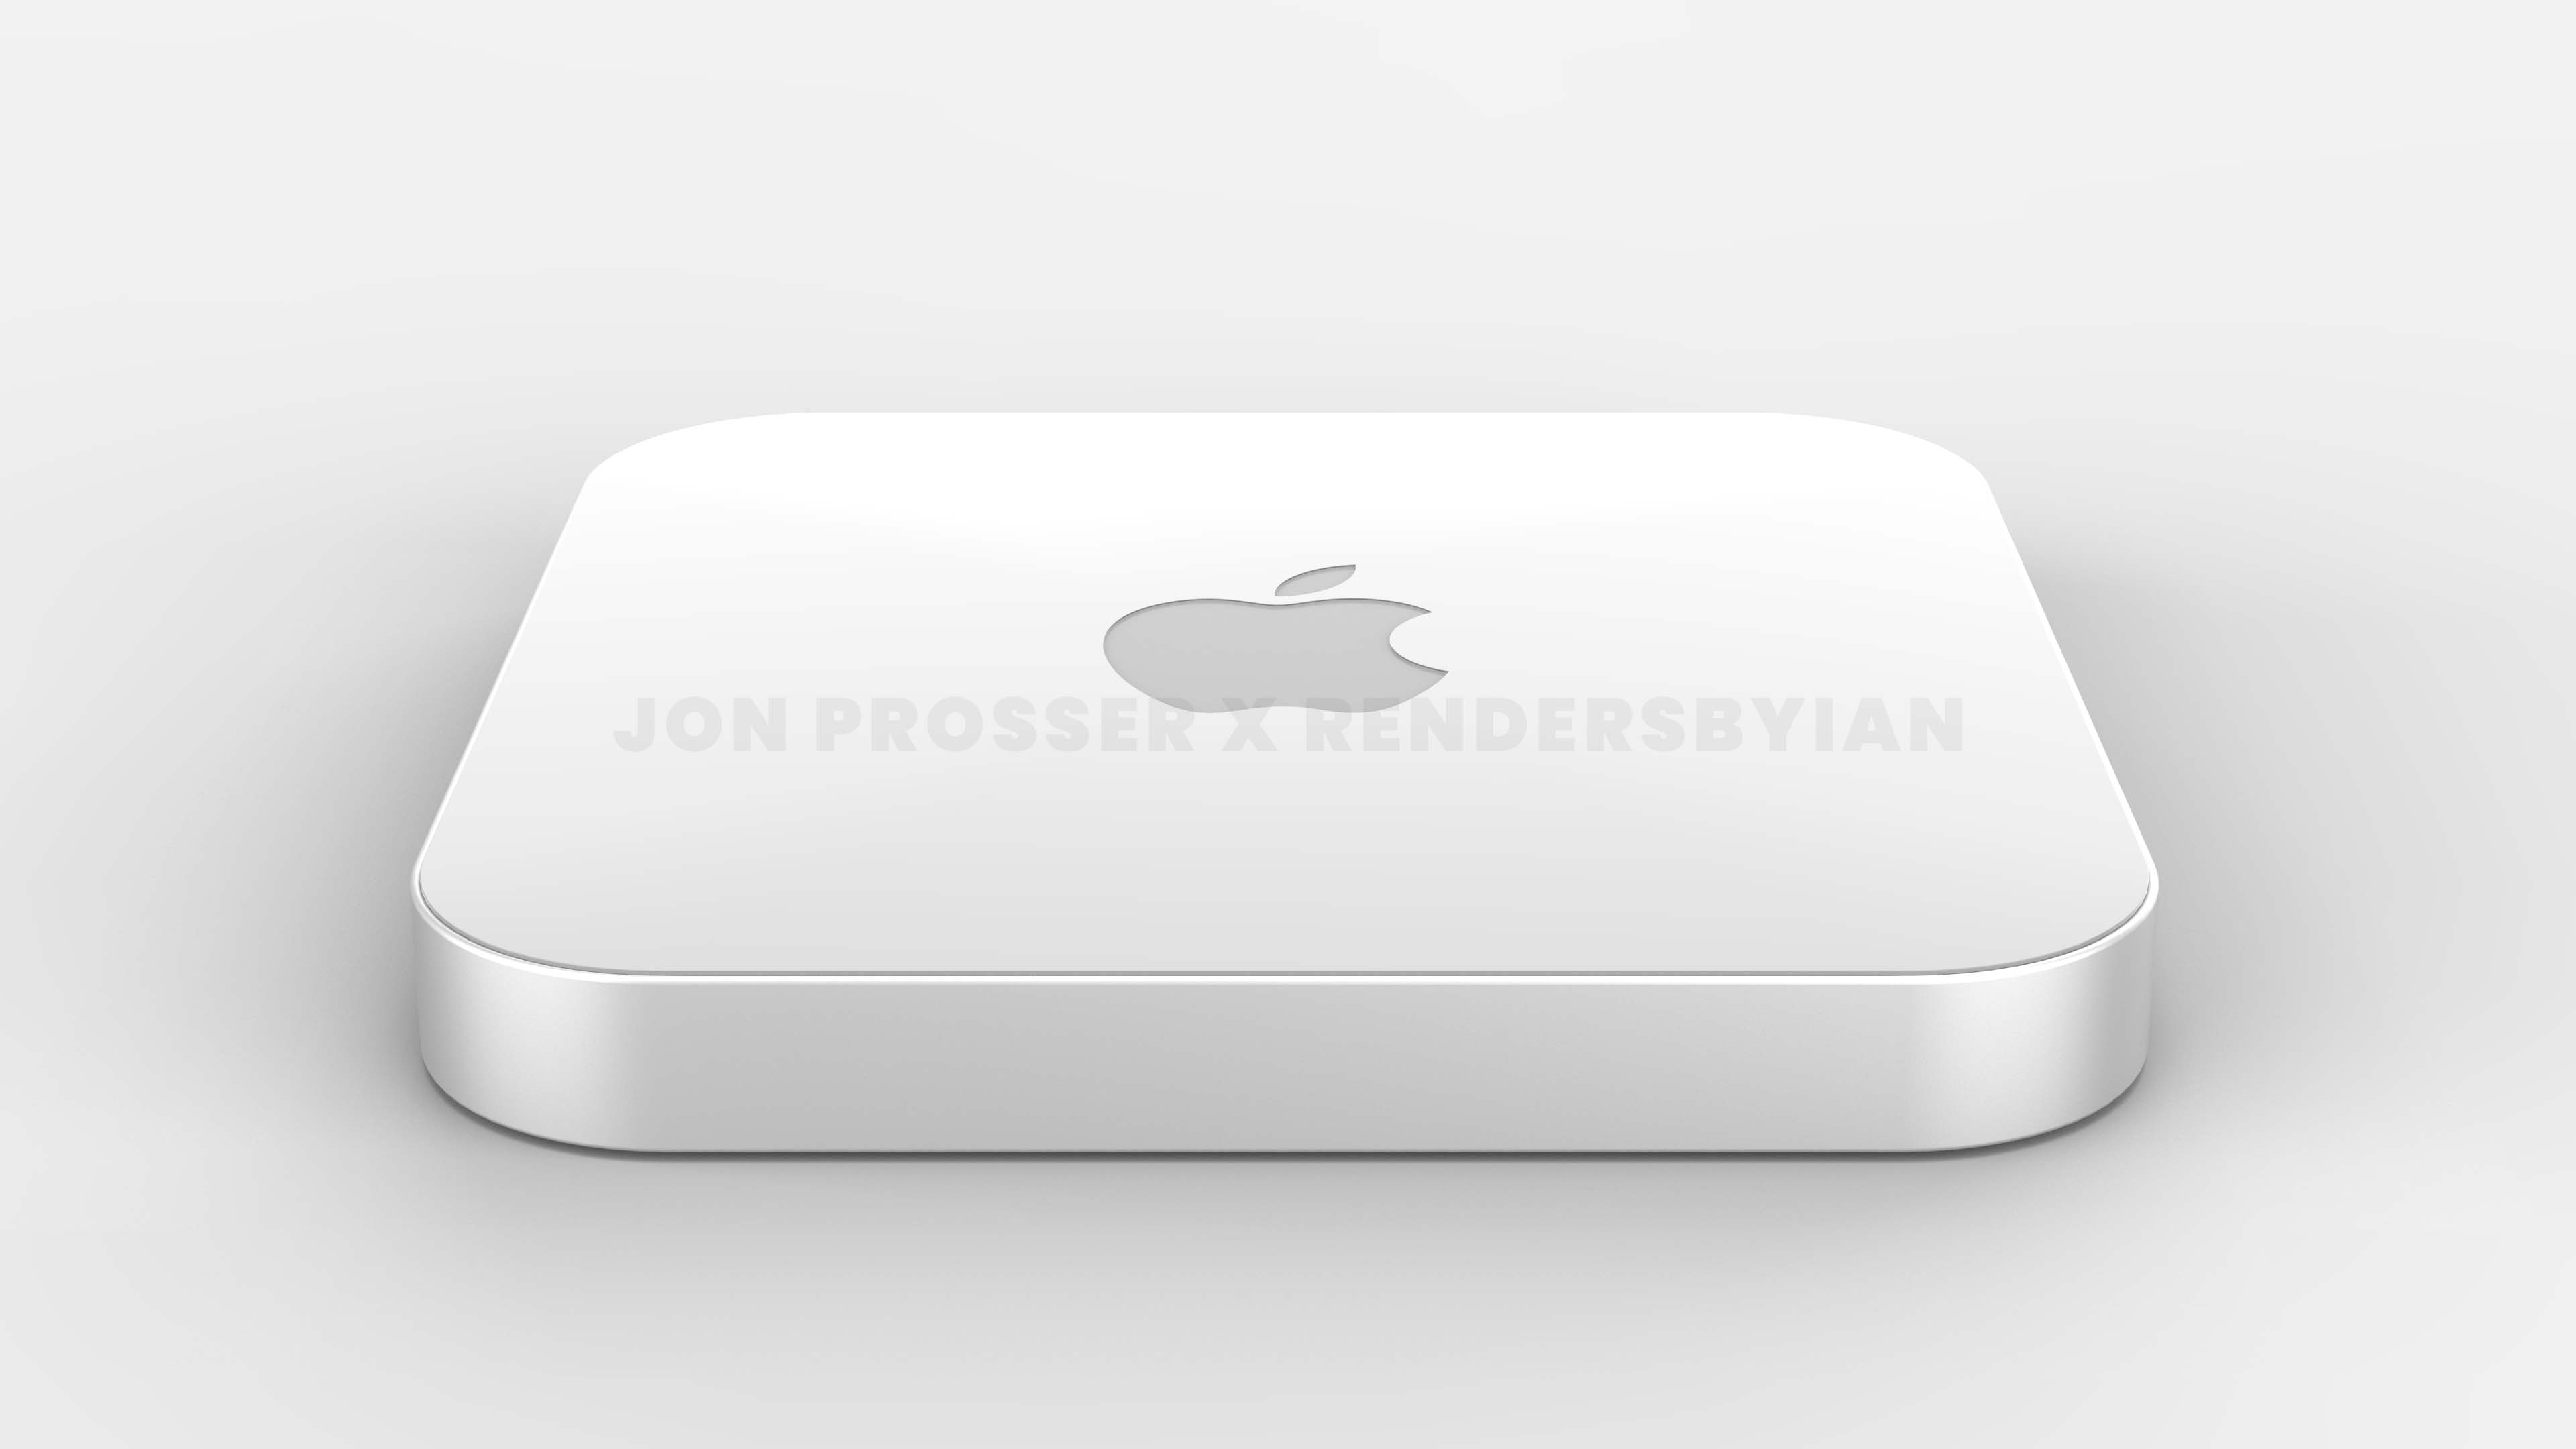 New Mac mini just leaked — what you need to know